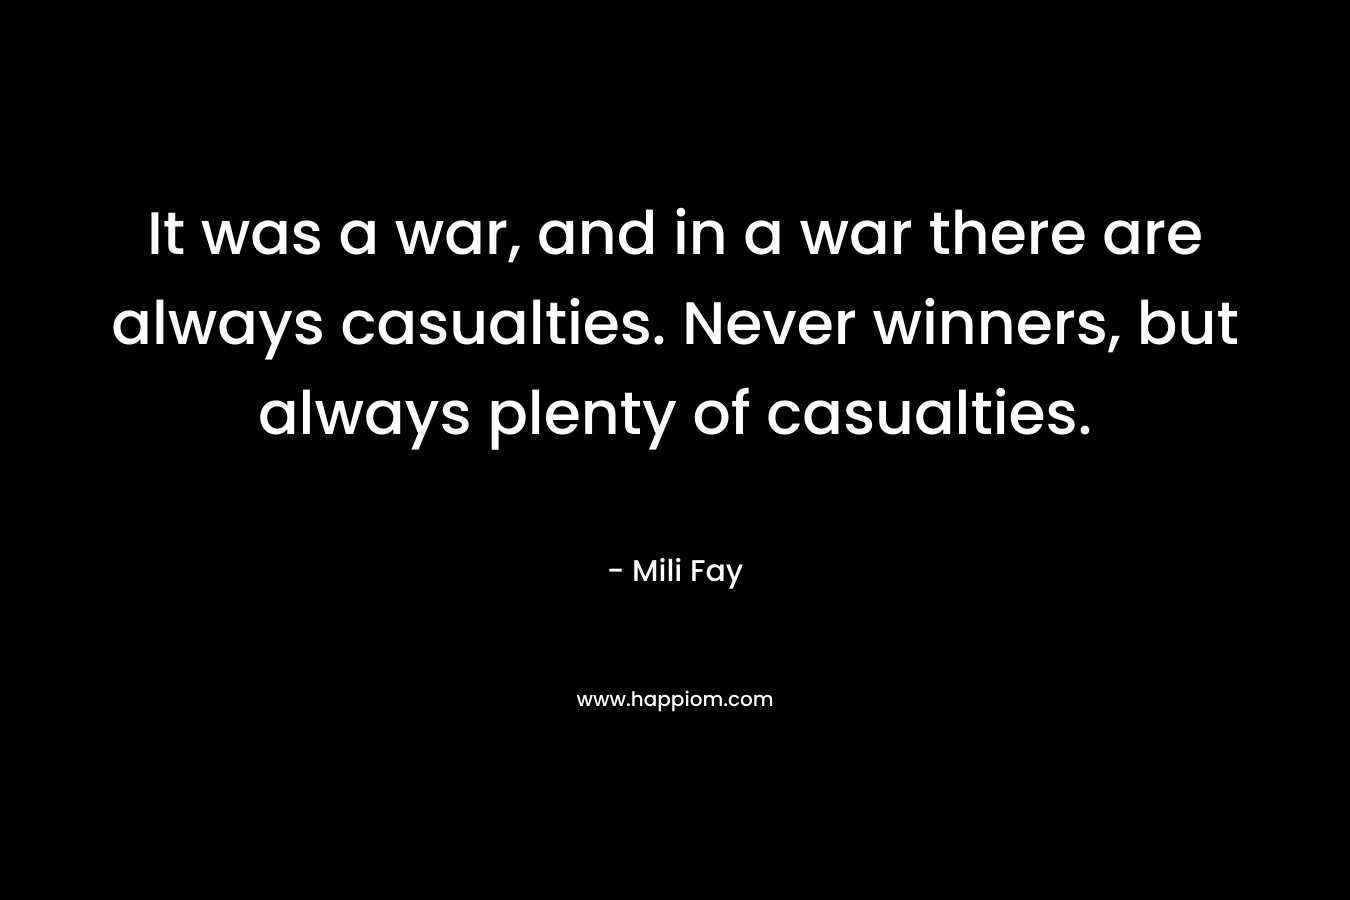 It was a war, and in a war there are always casualties. Never winners, but always plenty of casualties.